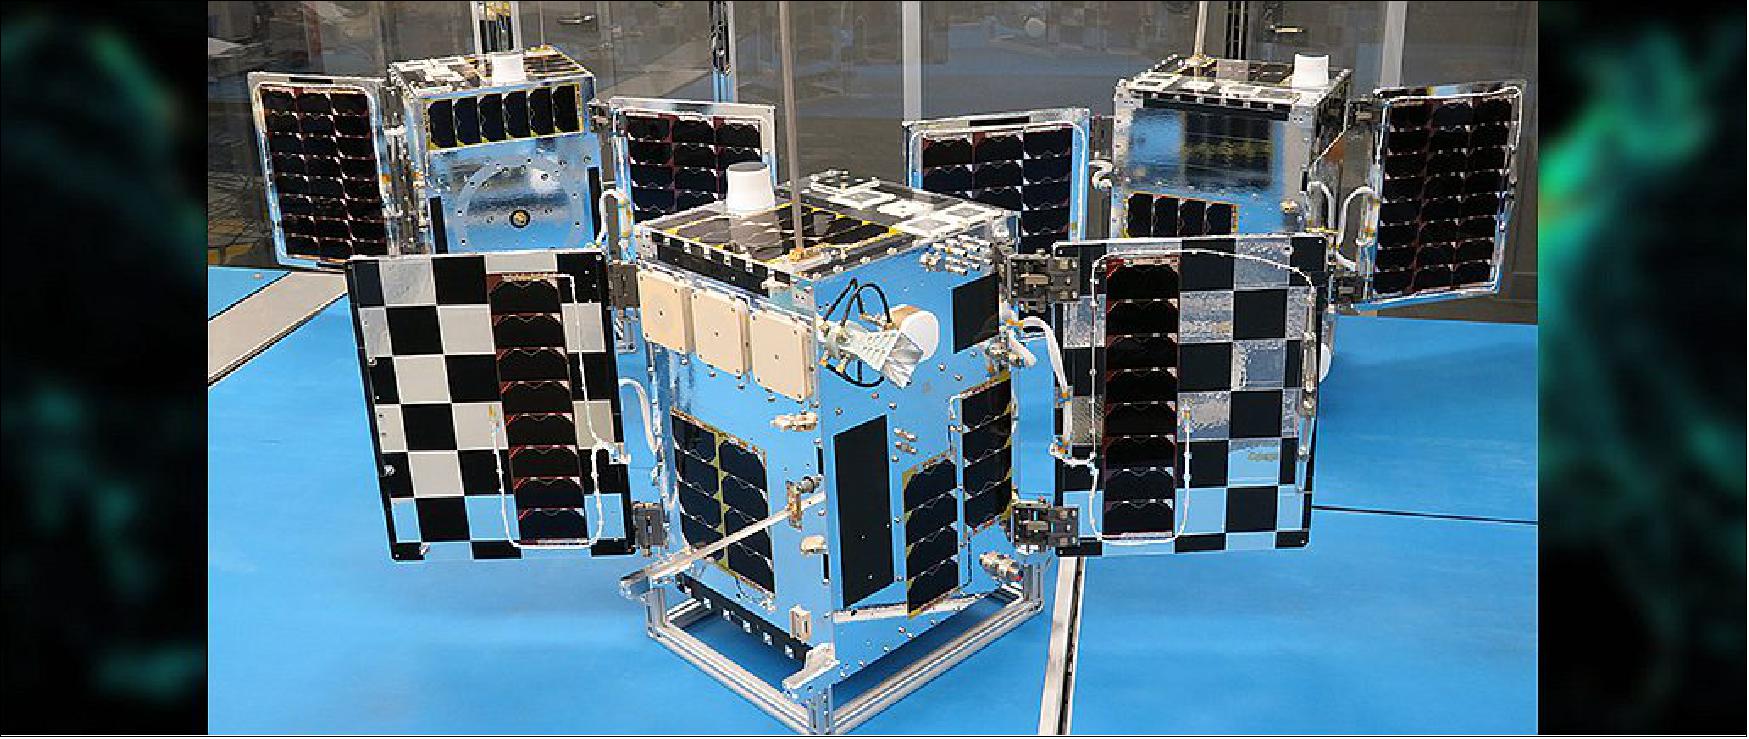 Figure 5: HawkEye 360’s Next-Gen Satellites Ship to Cape Canaveral for Launch (image credit: HawkEye360)